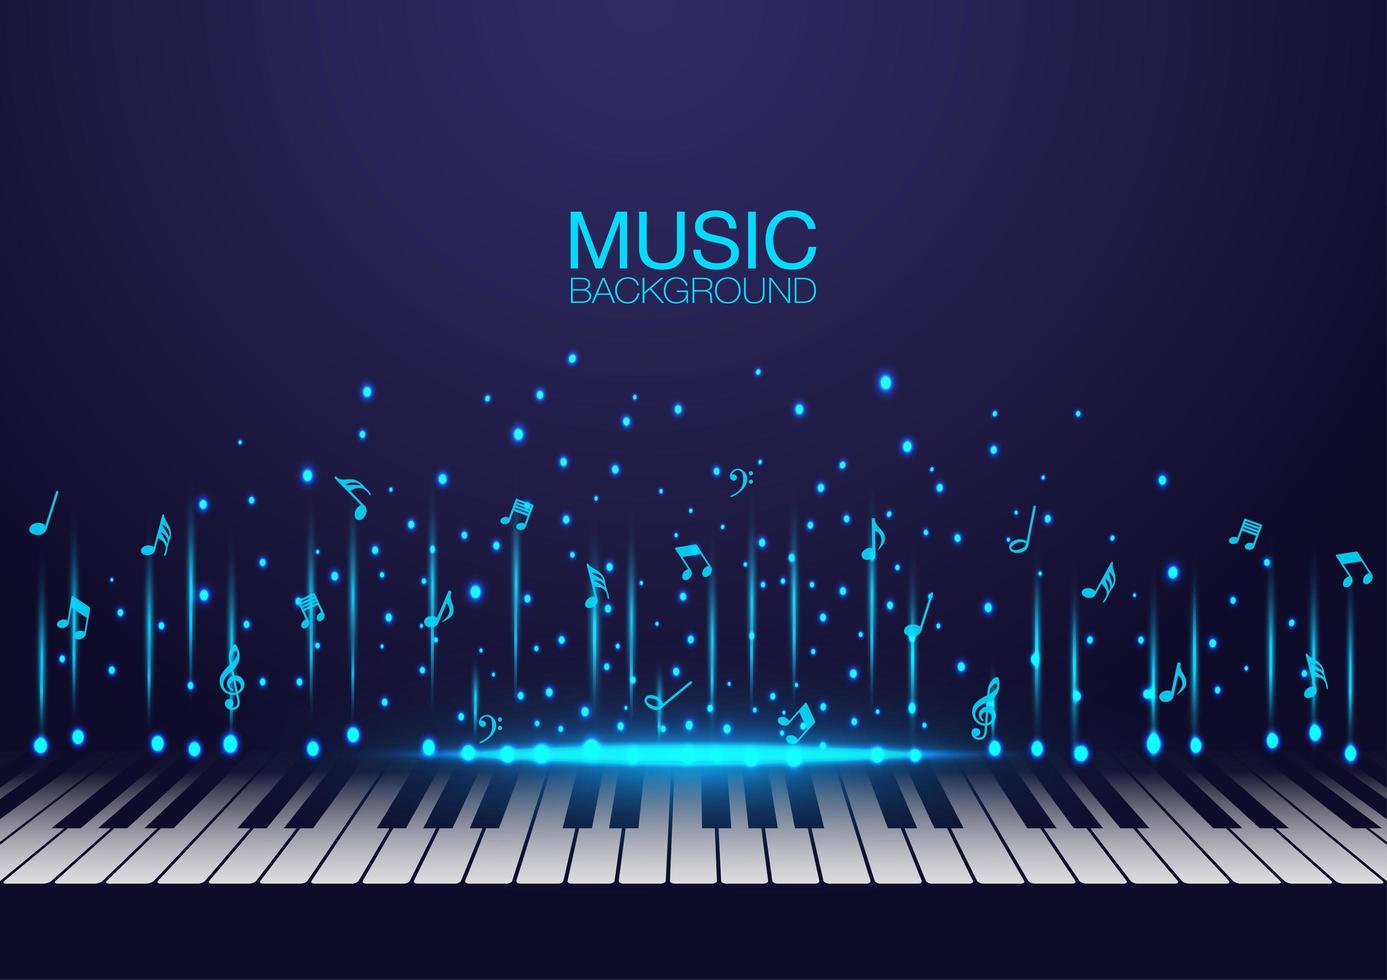 Piano keys with glowing flying music notes vector